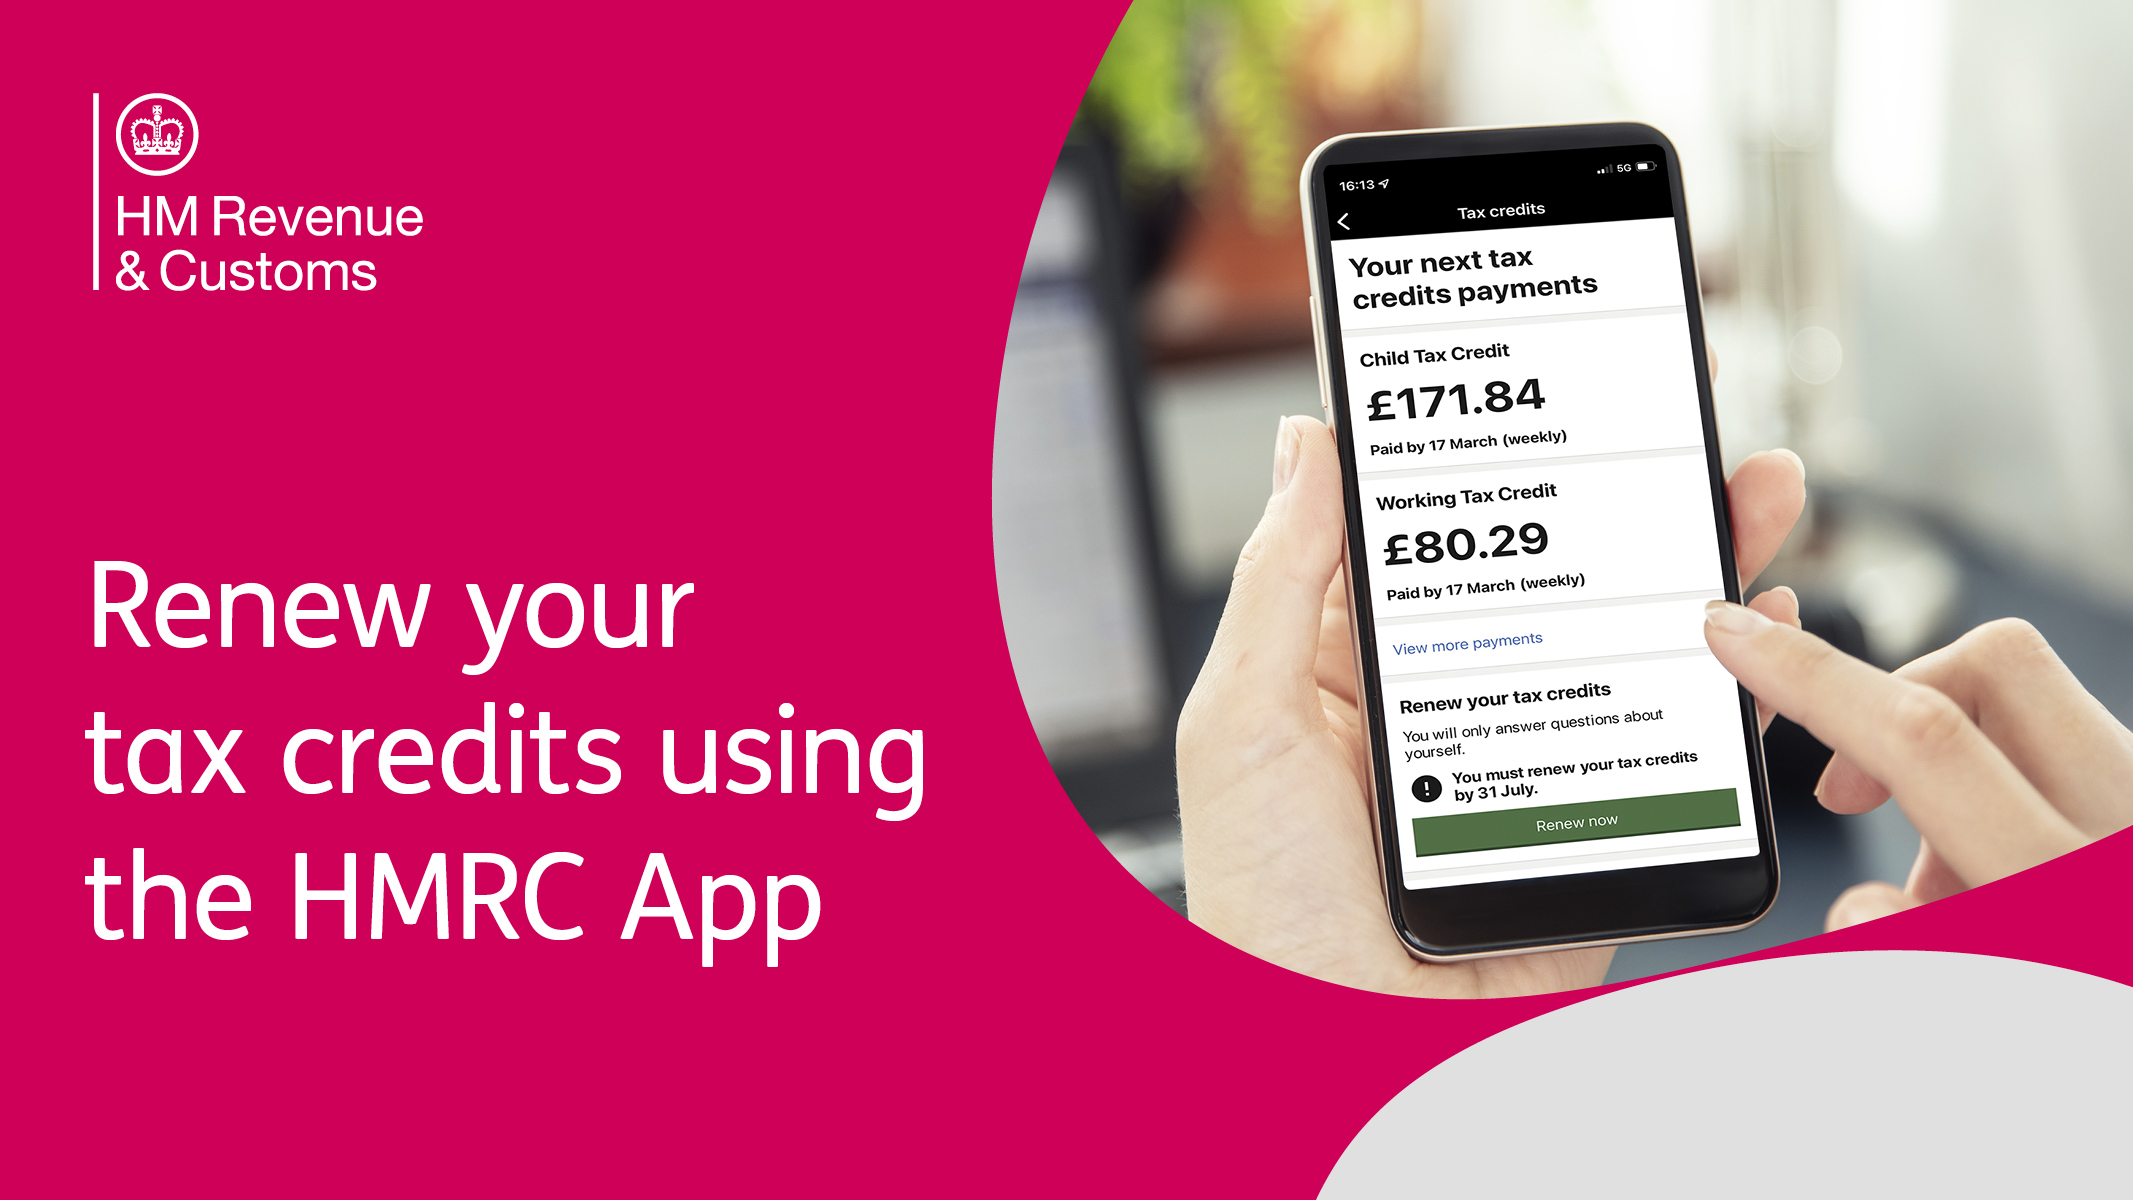 NEWS | HMRC issues important update for anyone who claims tax credits